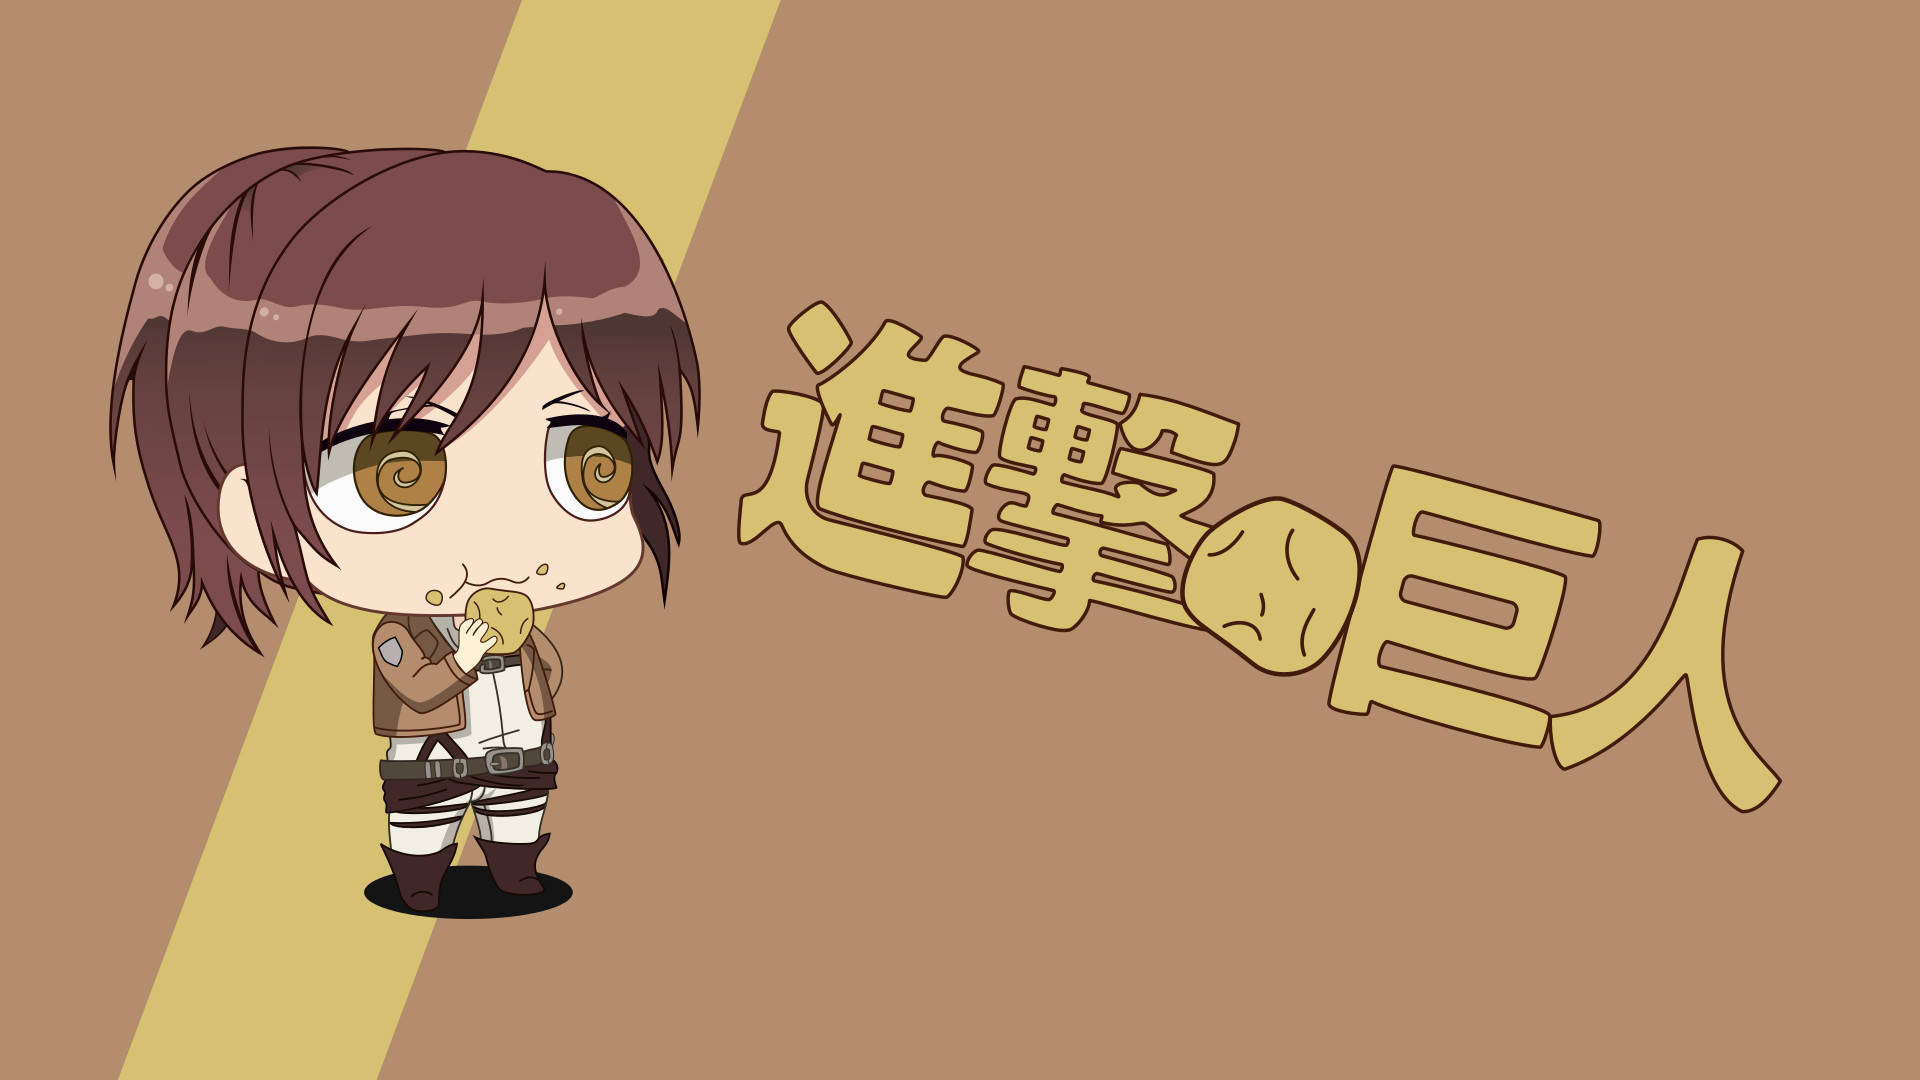 1920X1080 Chibi Wallpaper and Background